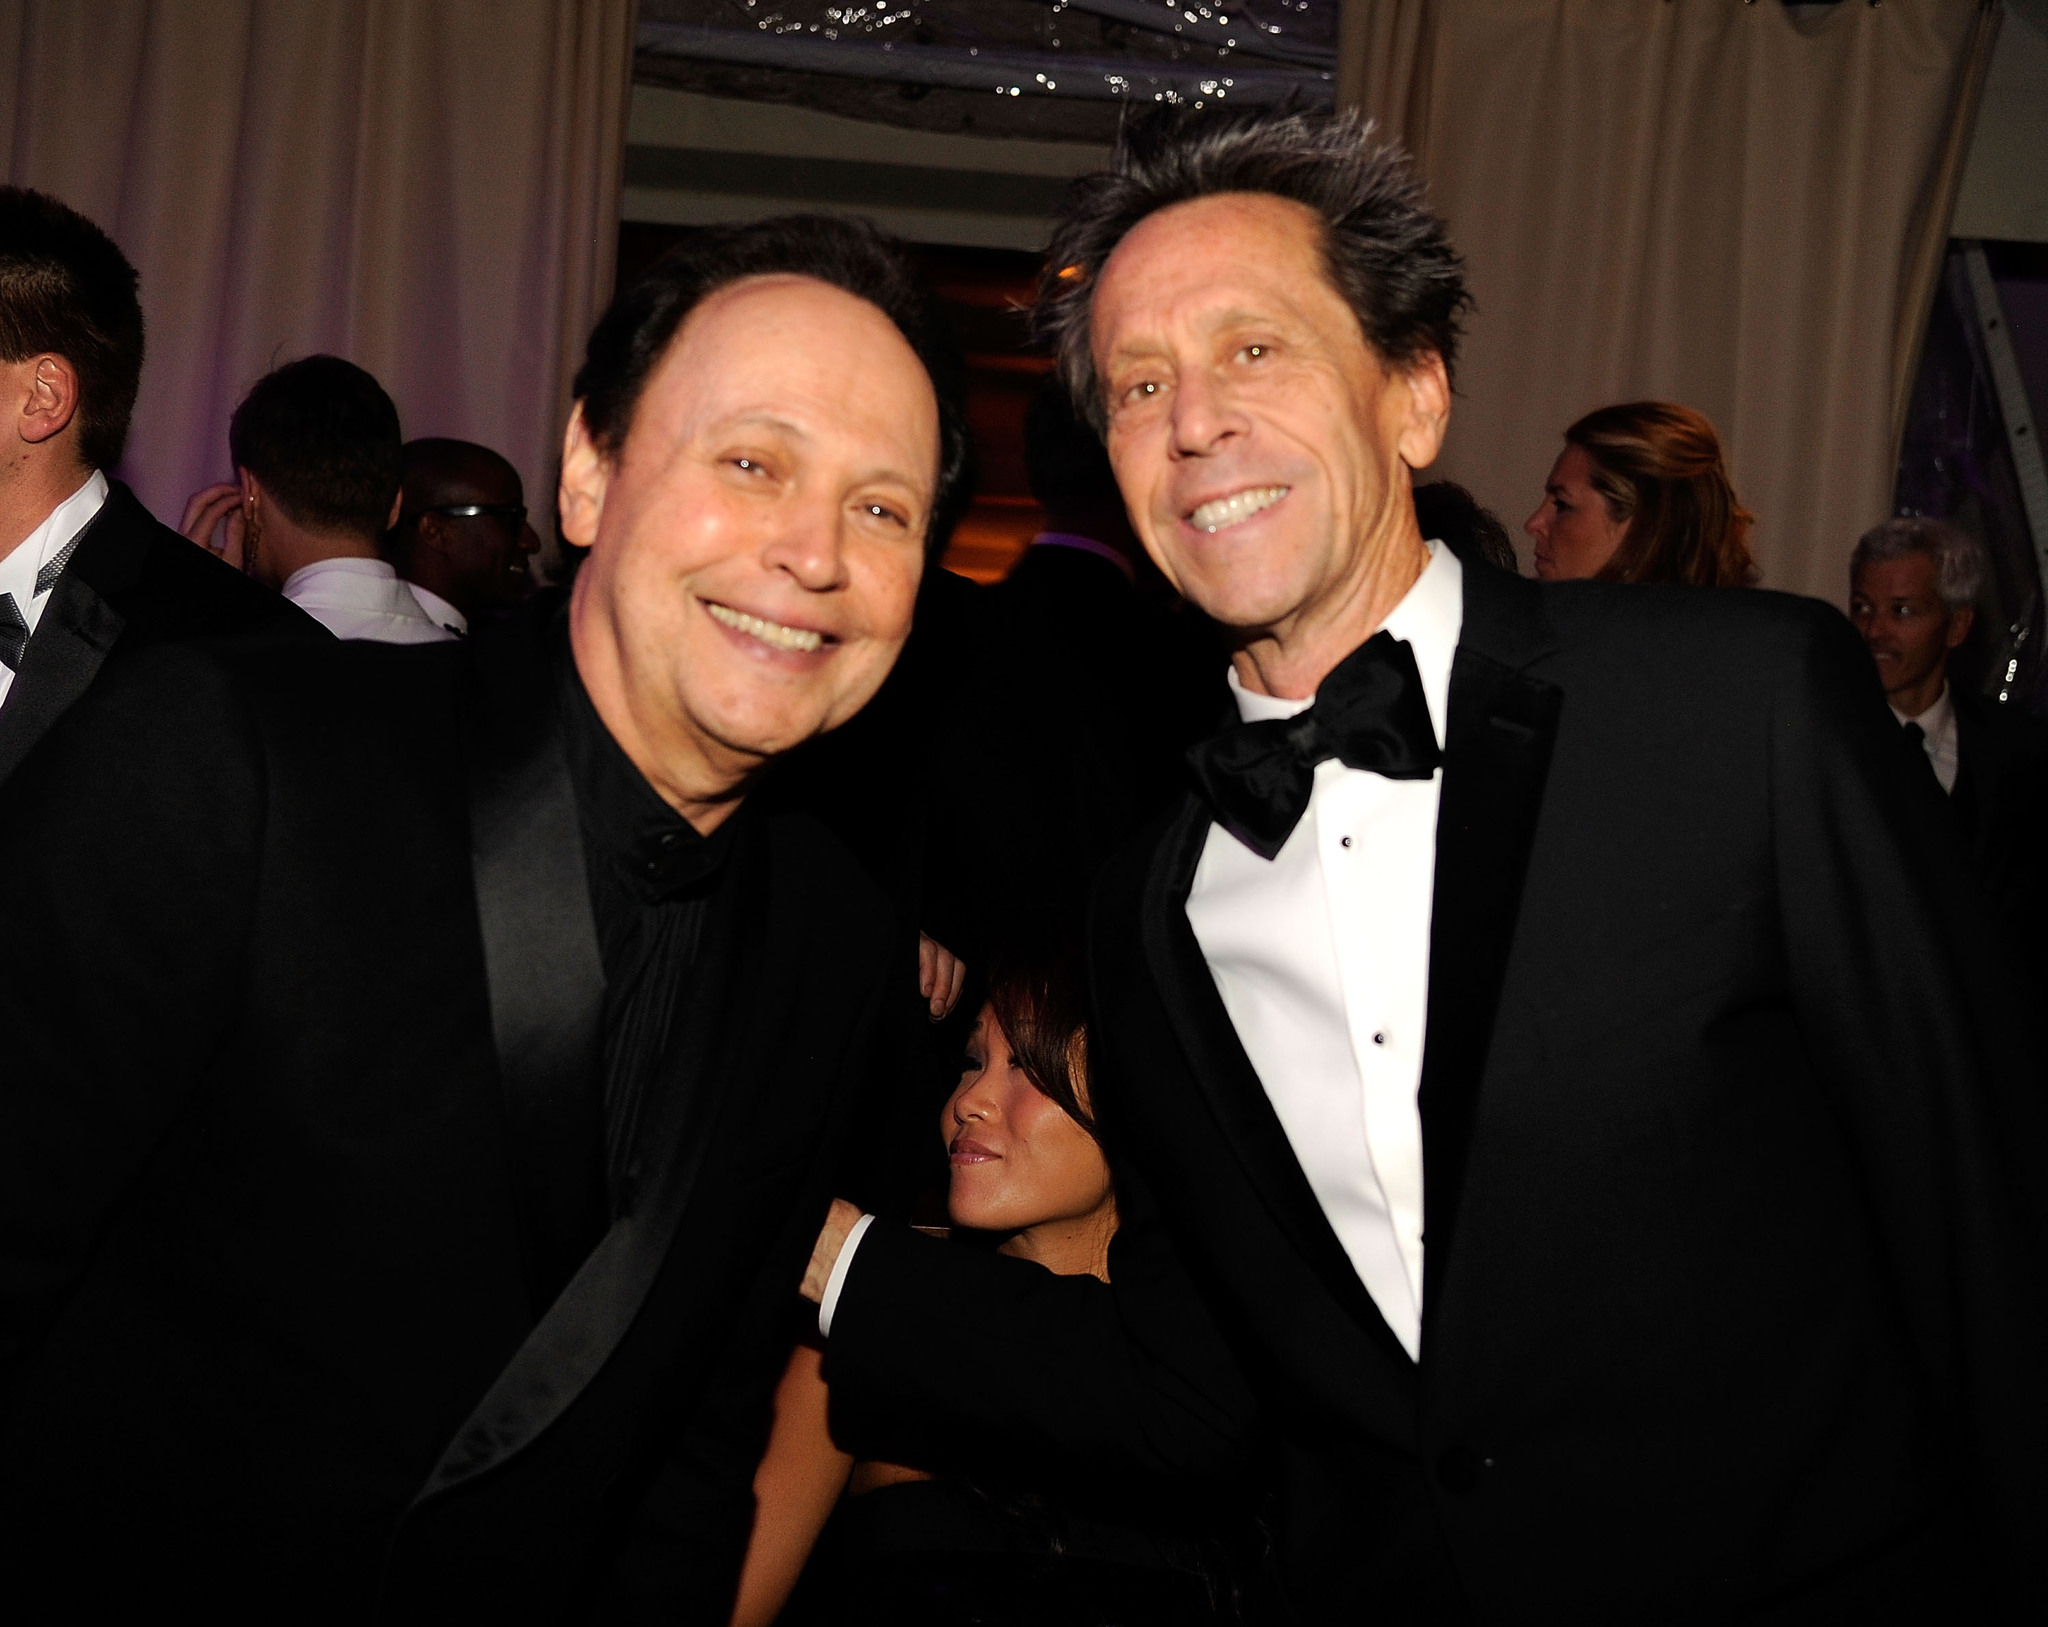 Billy Crystal and Brian Grazer